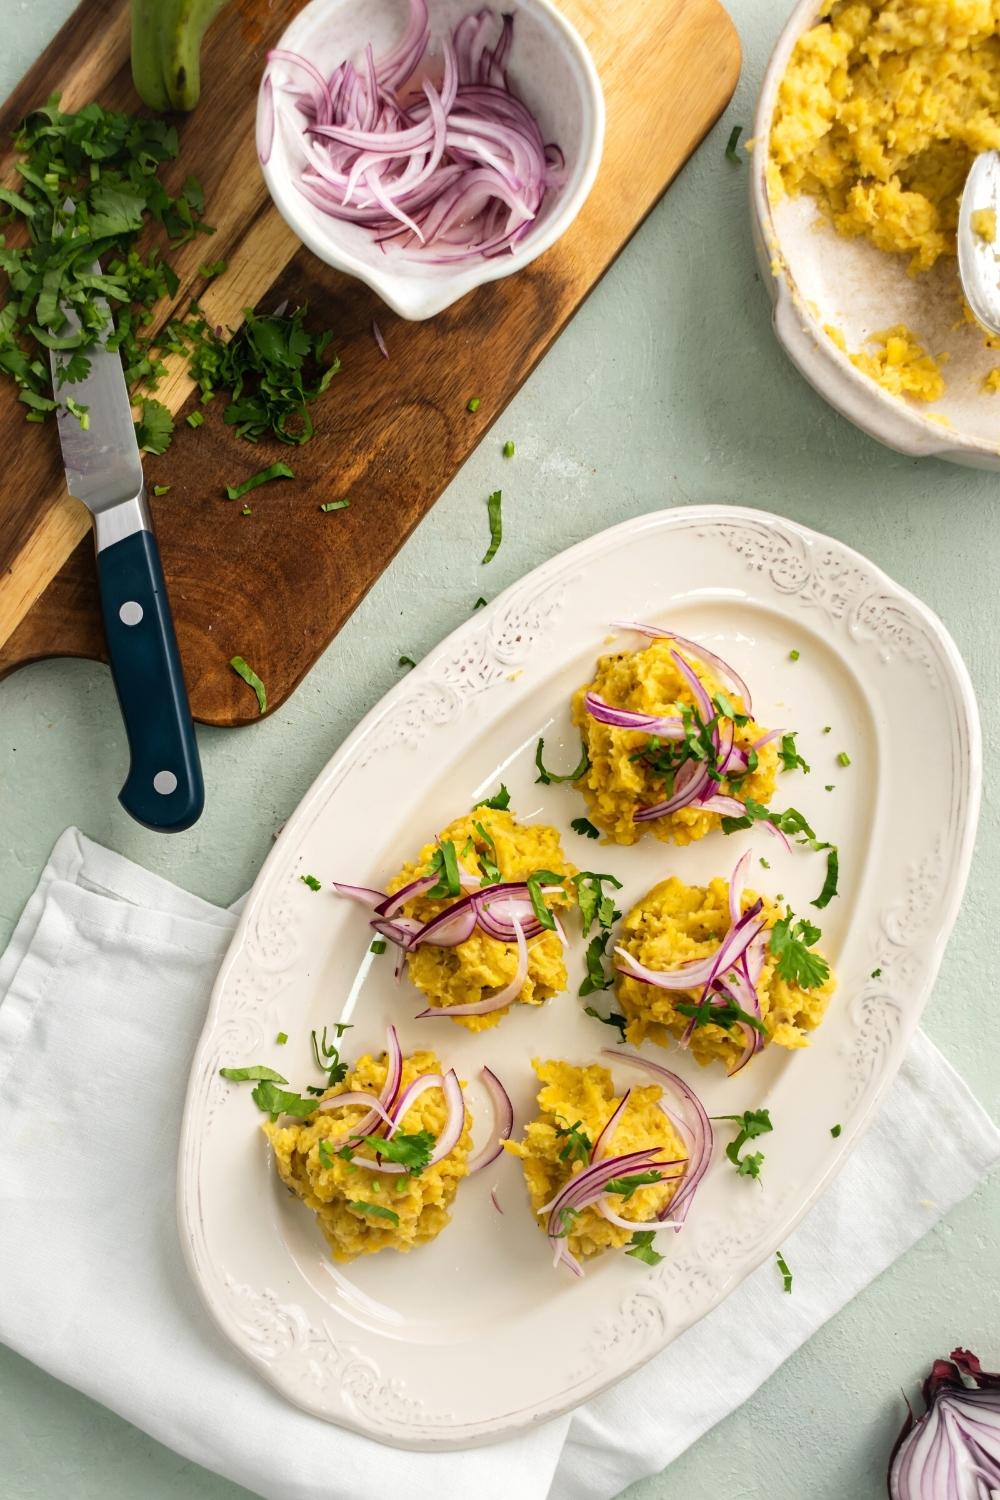 Pickled red onion on top of five scoops of mangu on a white plate that is on top of a white tablecloth on a gray counter. Behind the plate of mangu is part of a white bowl filled with the mangu and a wooden cutting board with chopped parsley and pickled red onion in a white bowl.